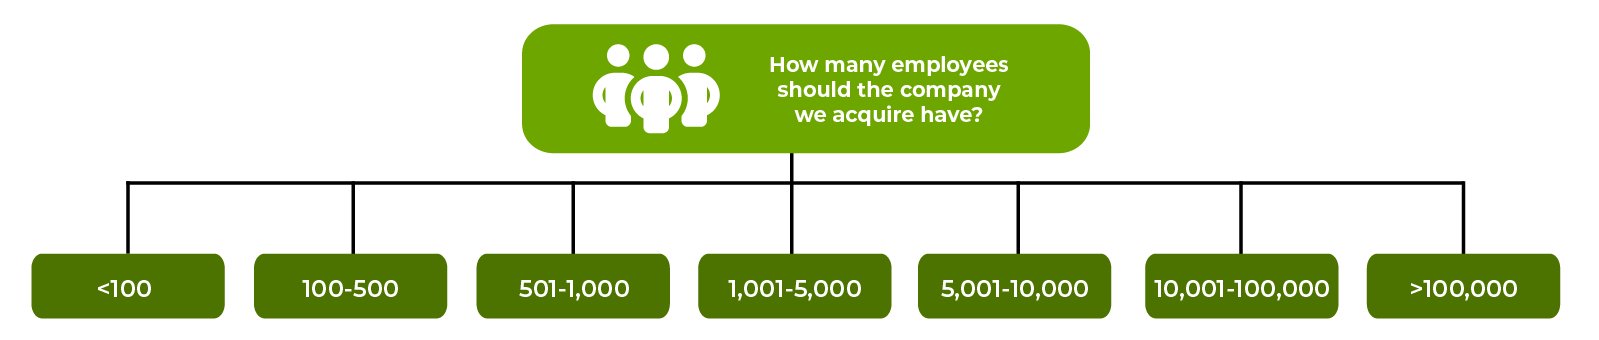 MECE example: Employees to acquire.